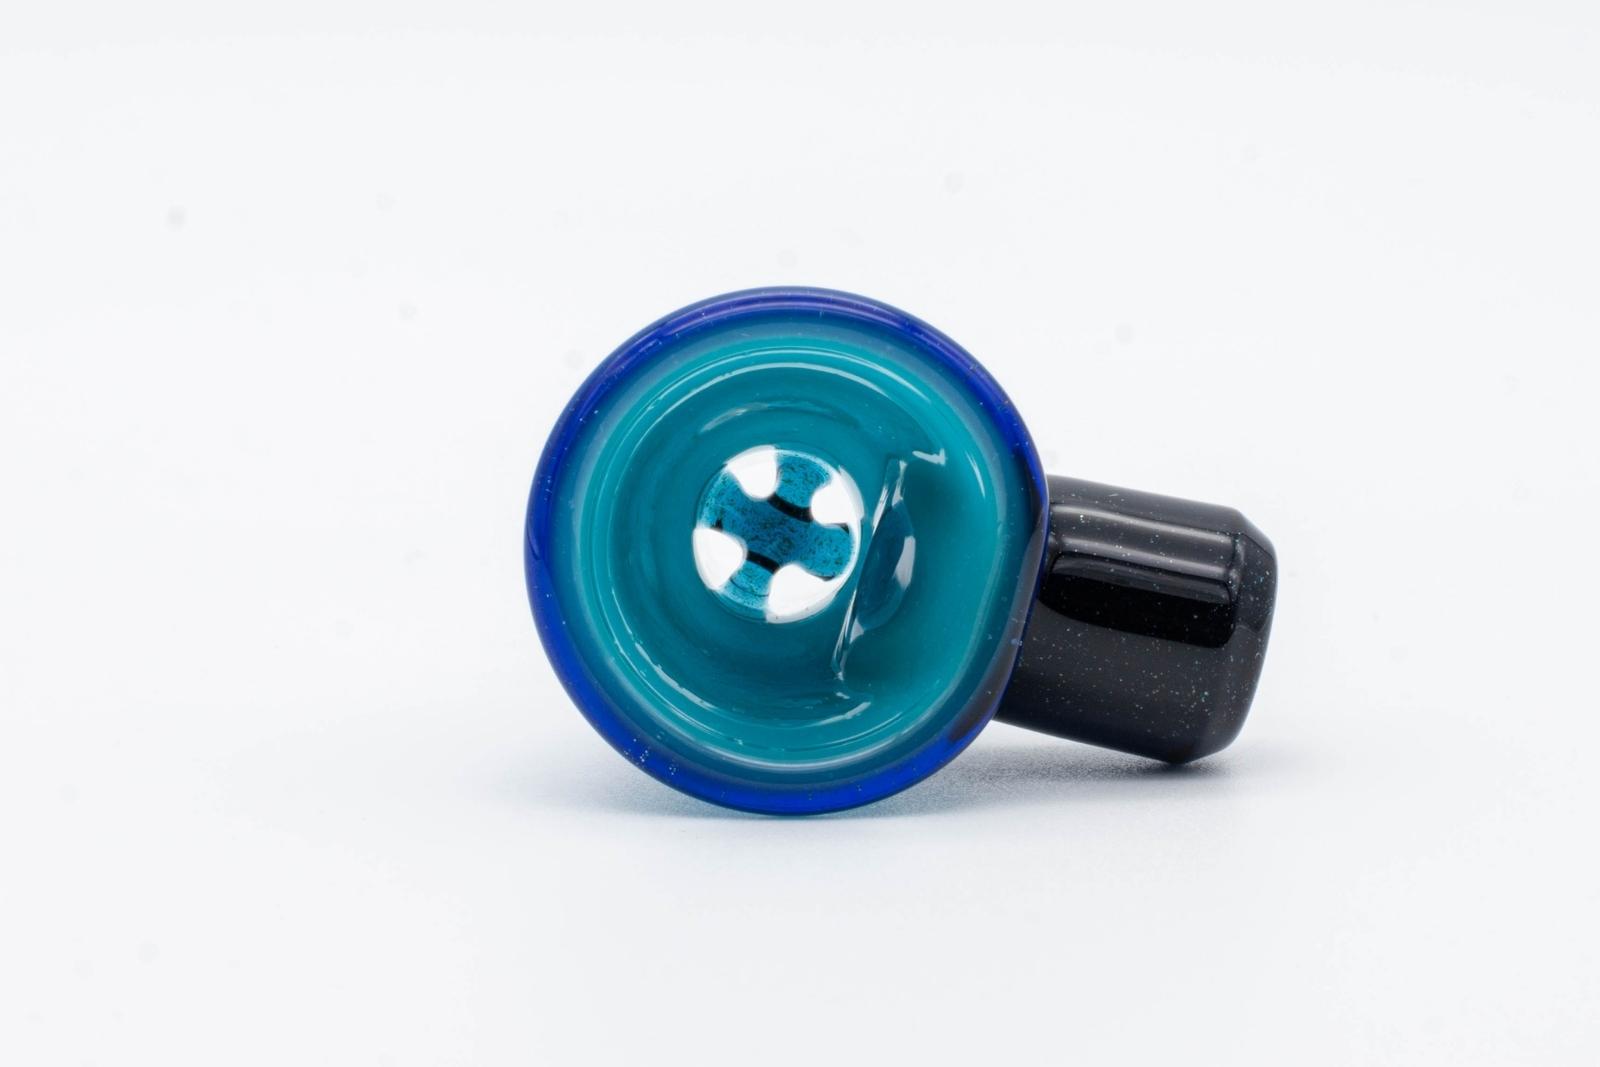 A 14mm blue slide made by BorOregon, on a white background